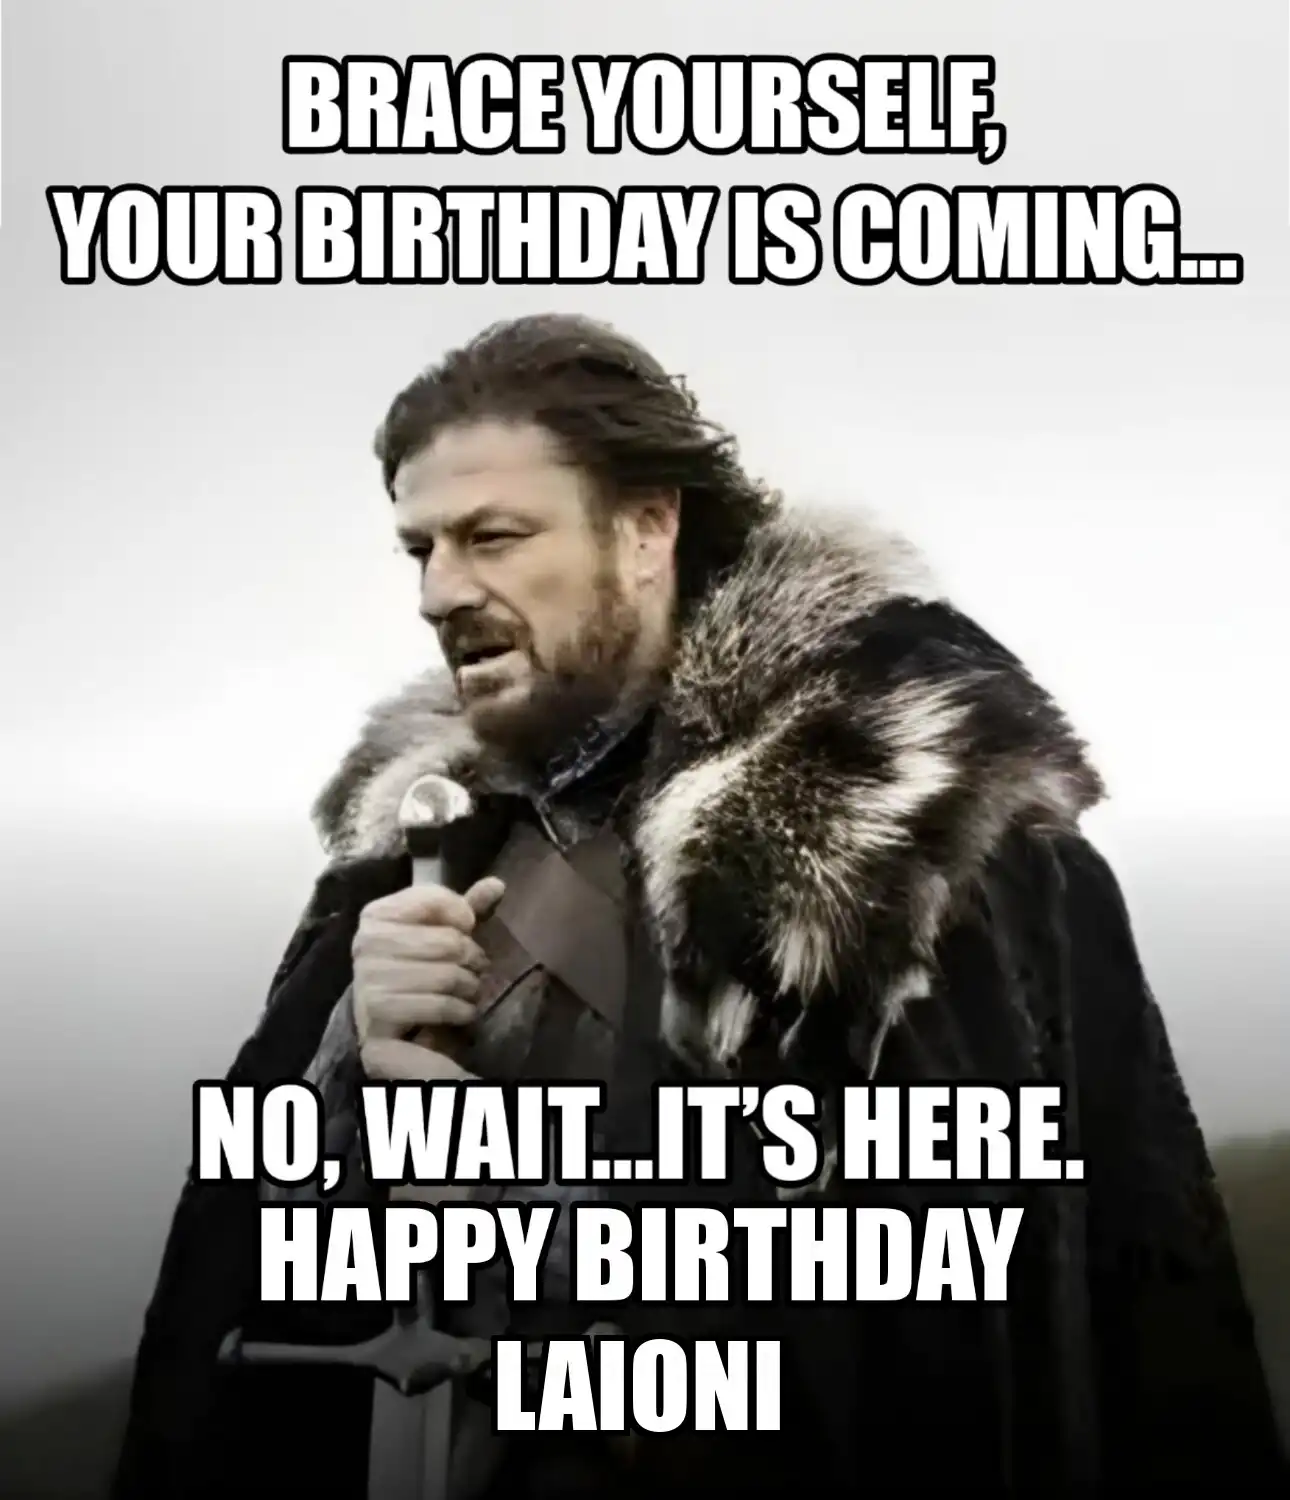 Happy Birthday Laioni Brace Yourself Your Birthday Is Coming Meme